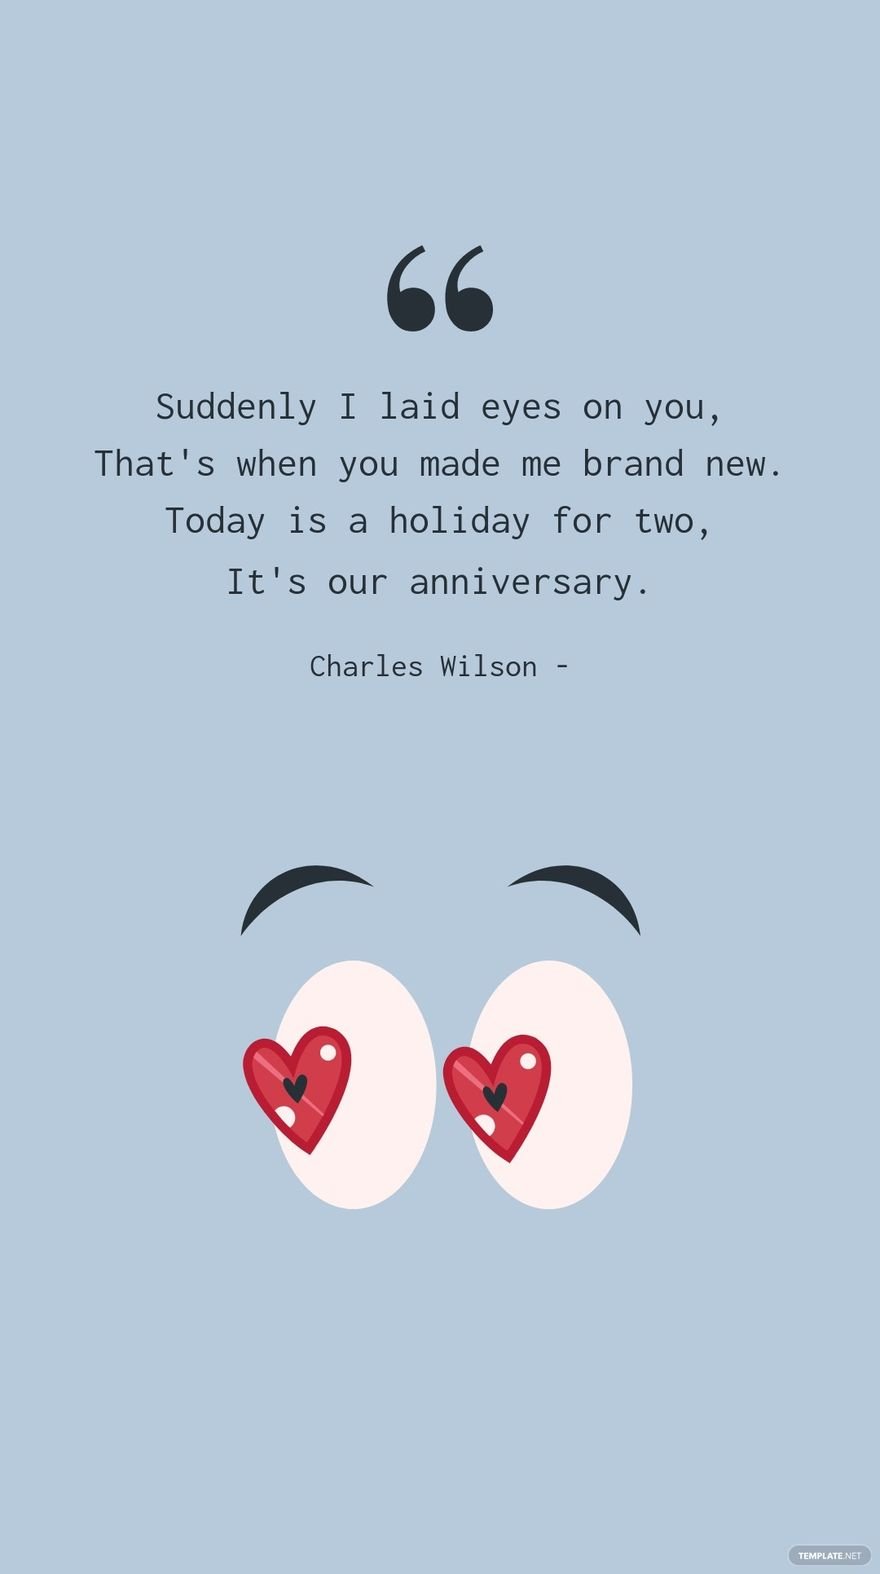 Charles Wilson - Suddenly I laid eyes on you, That's when you made me brand new. Today is a holiday for two, It's our anniversary.